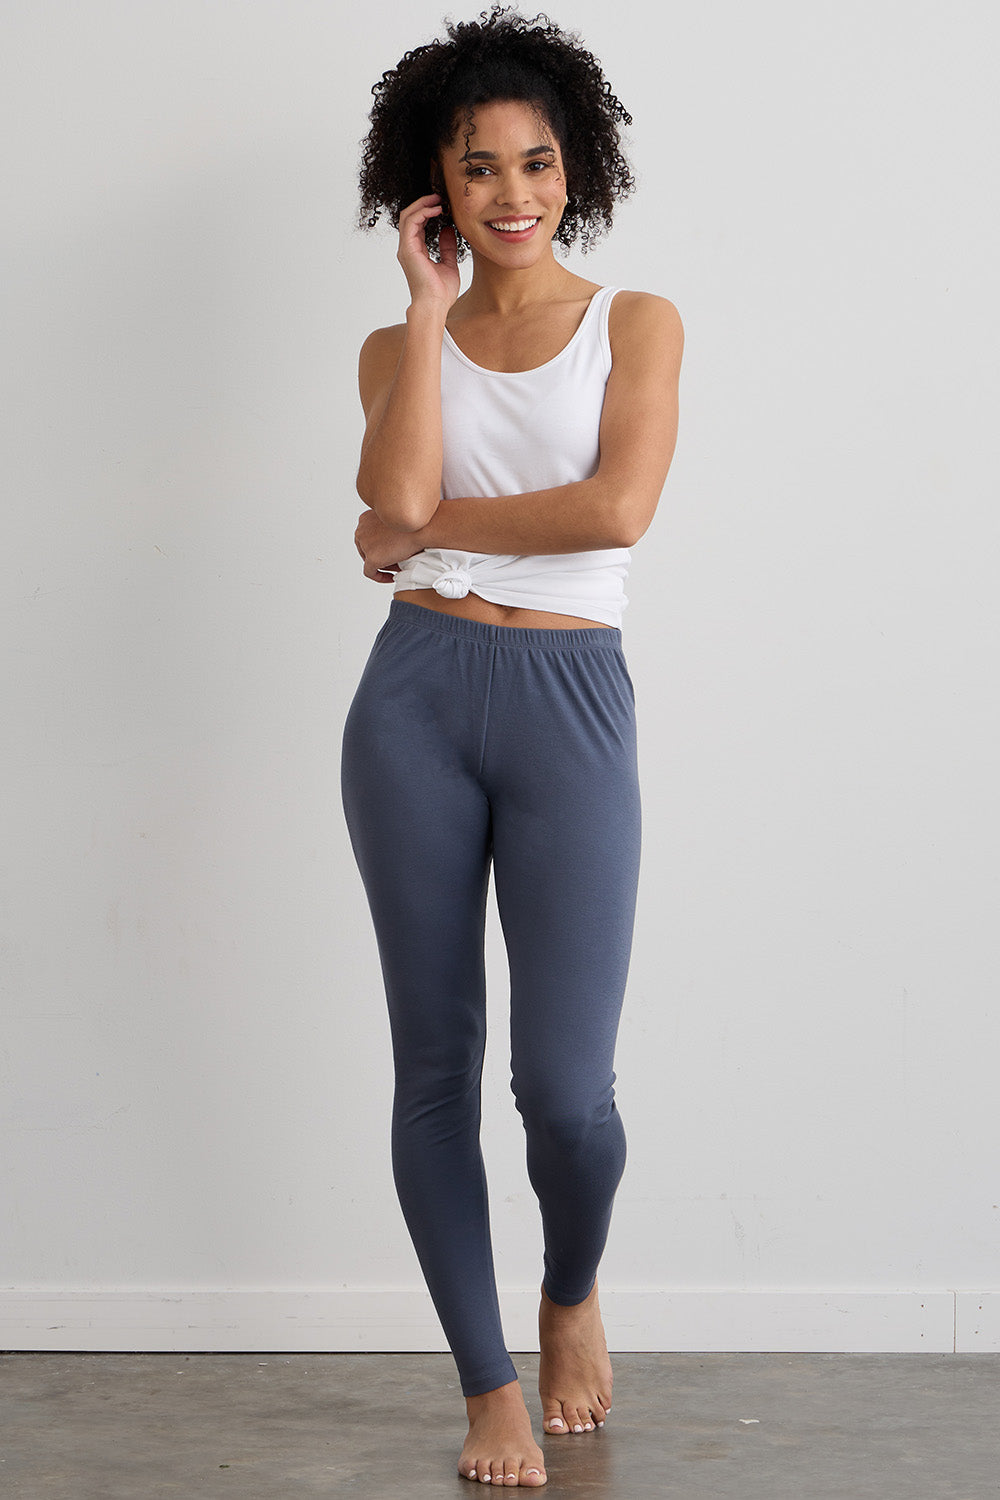 LCA1C722, Woman legging 7/8 in organic cotton, (Color: Black - Adult sizes:  XL), Shipping time: Immediate